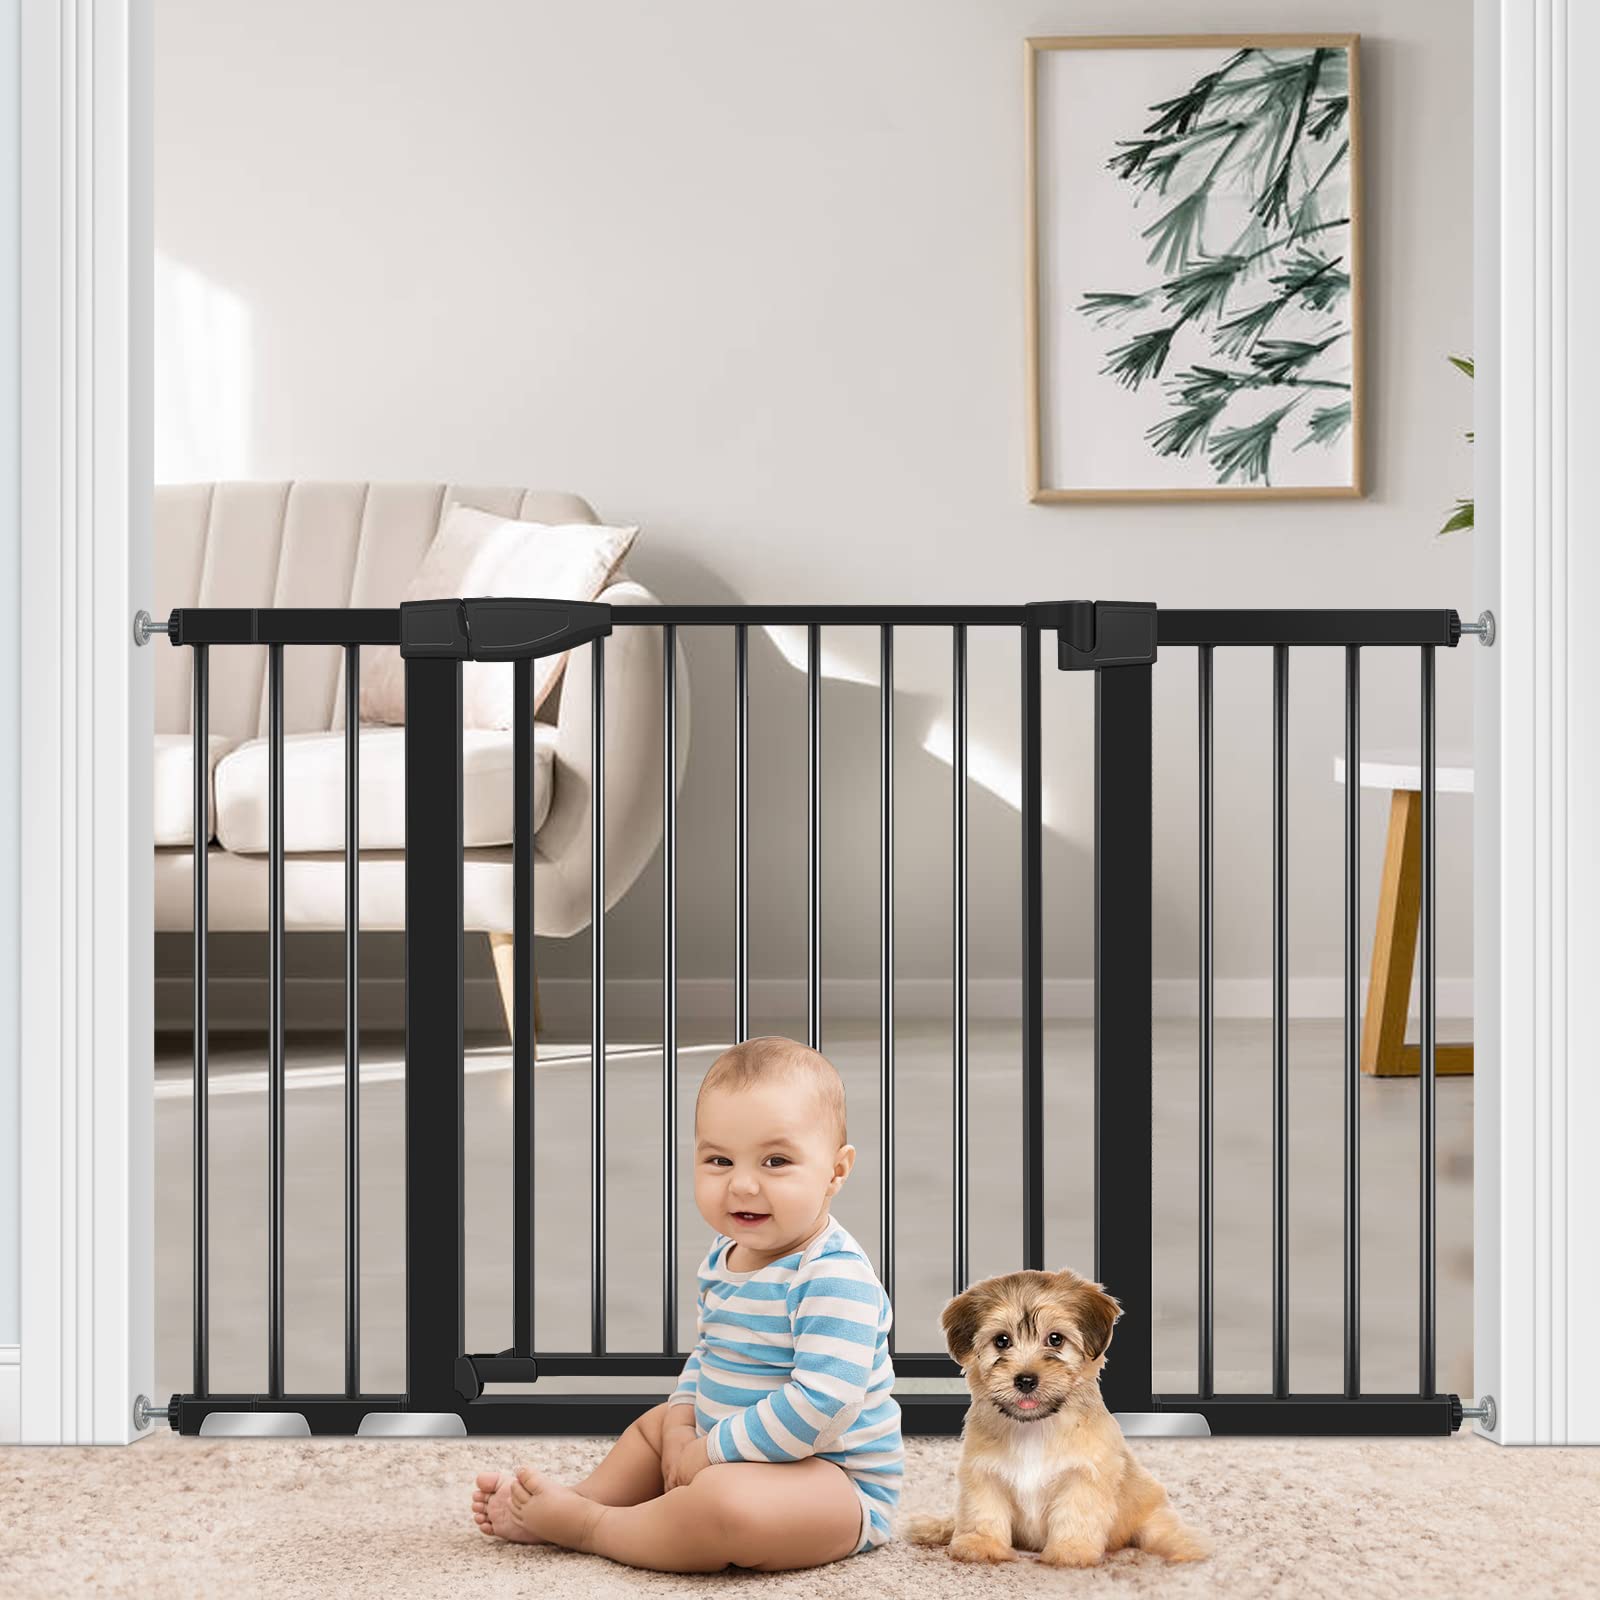 Selecting the Best Child Safety Gate for Your Household插图3